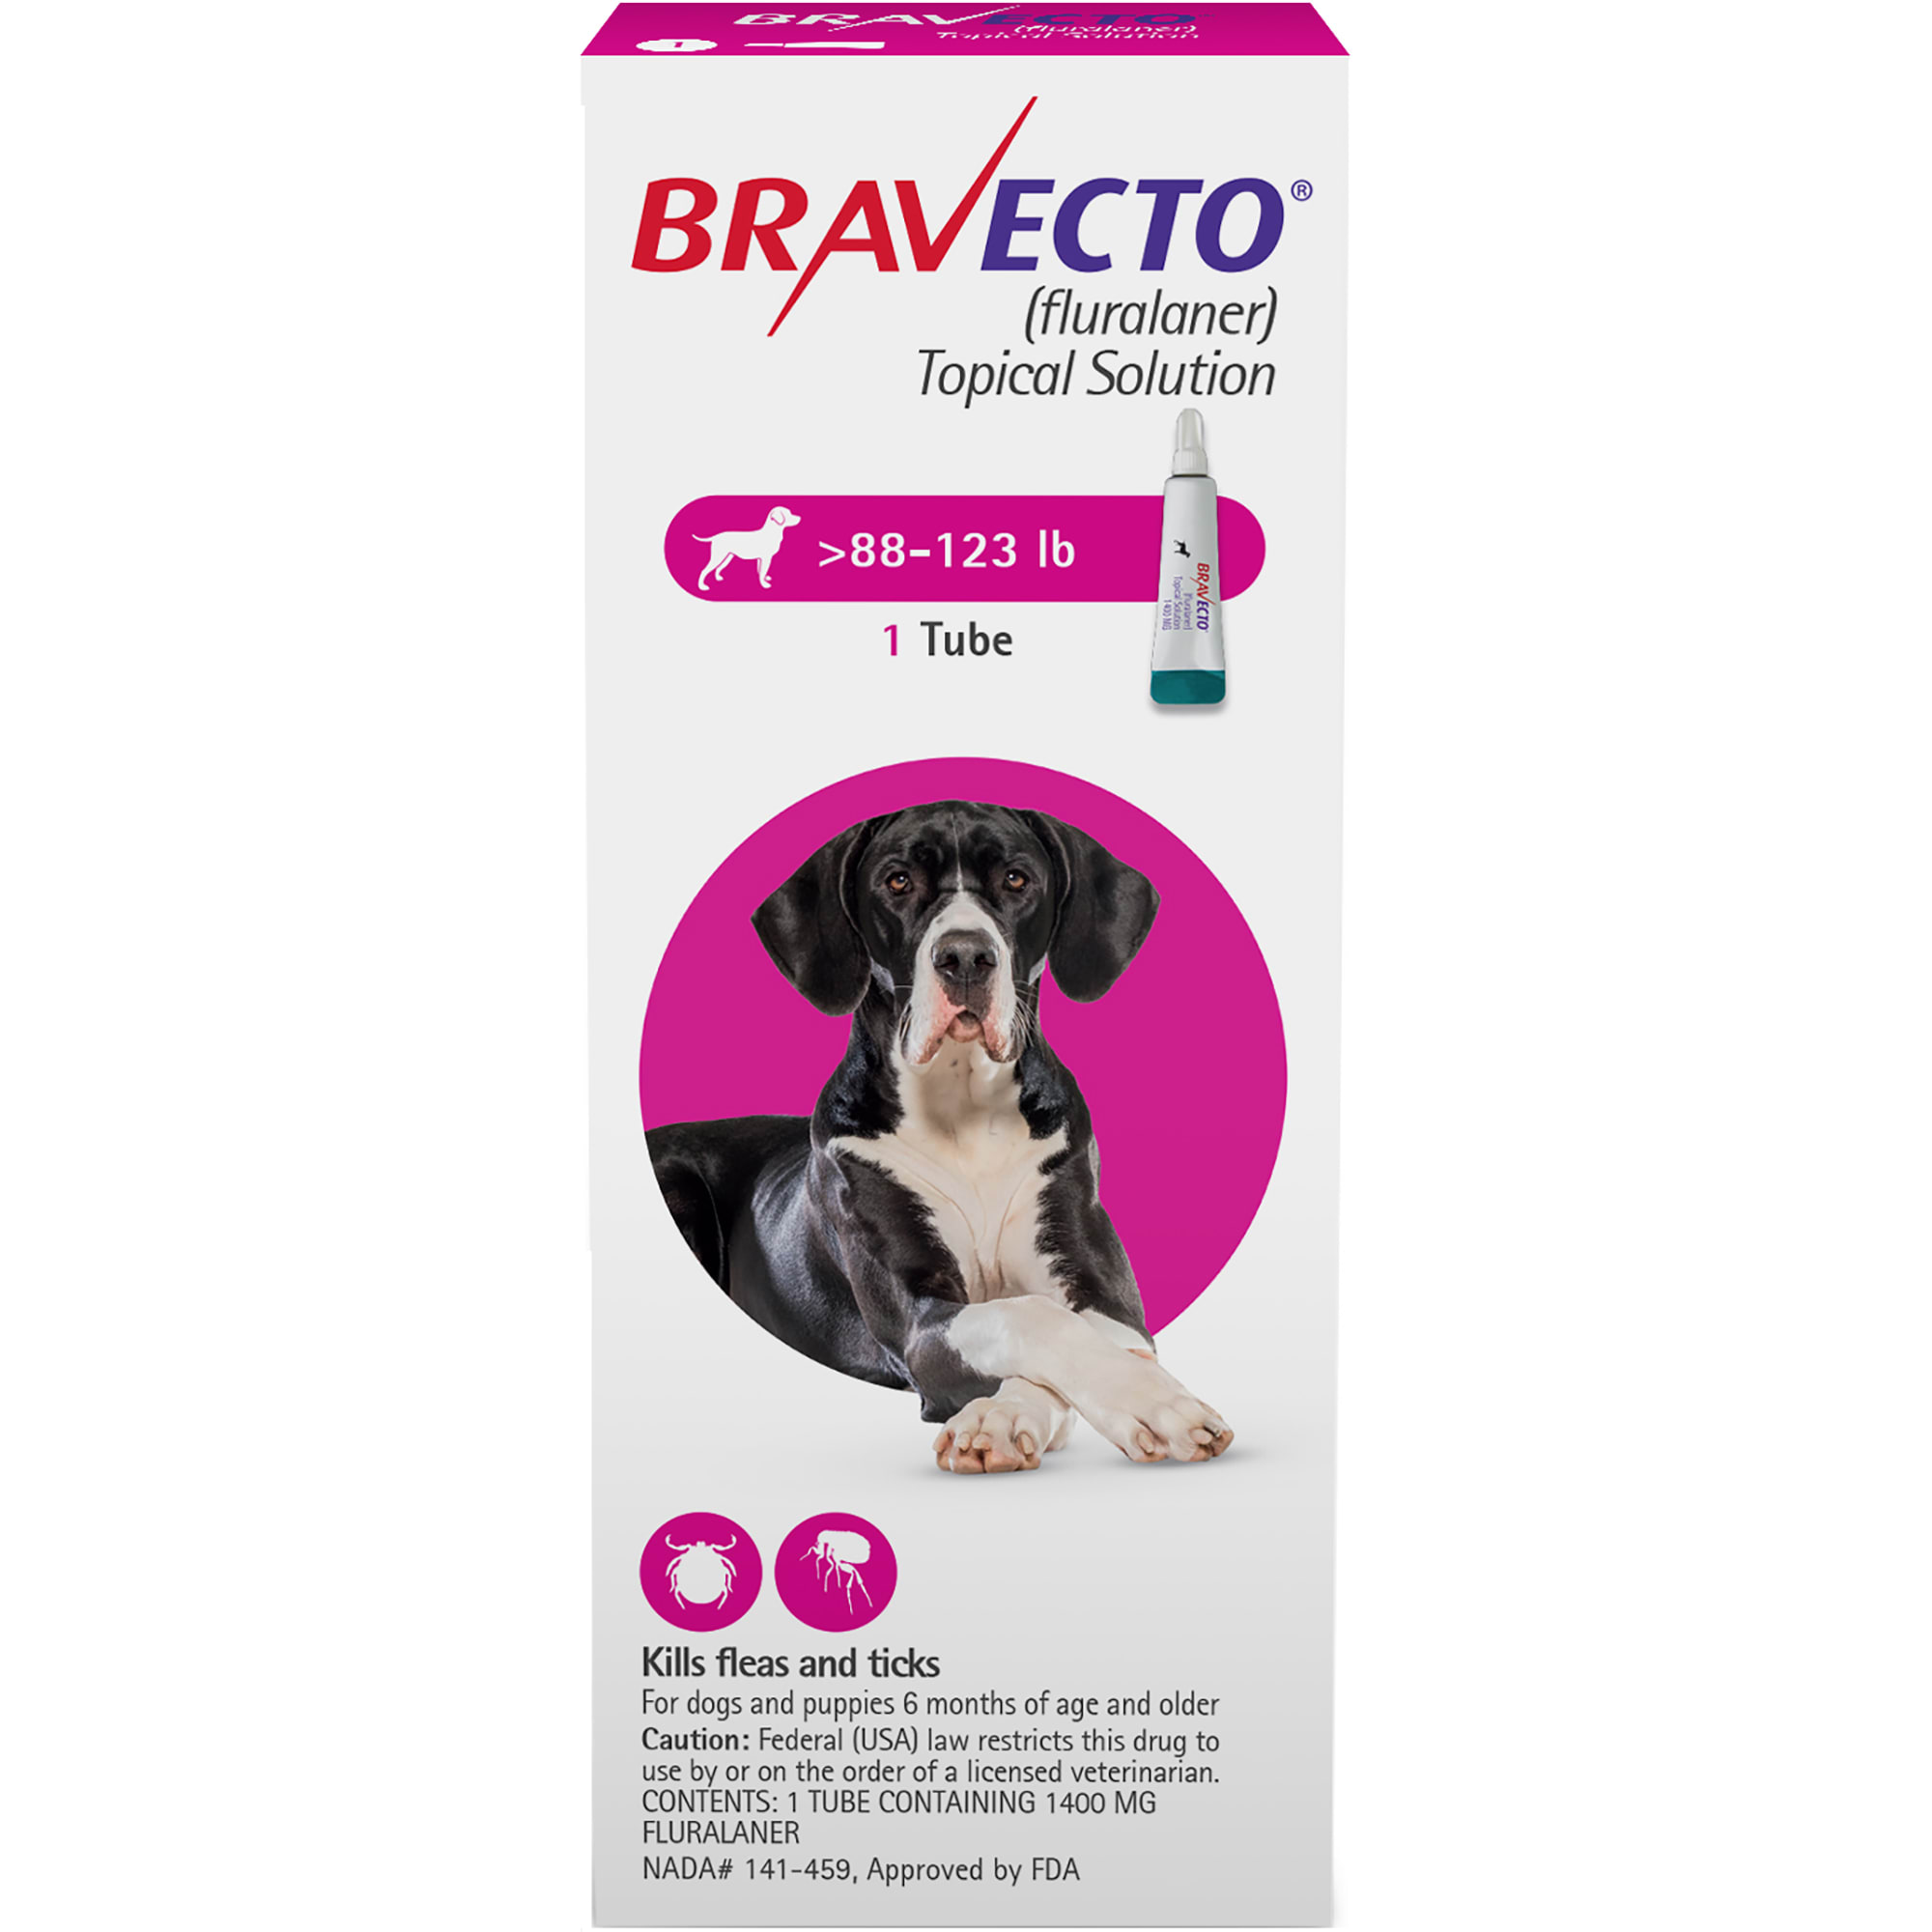 Bravecto Topical Solution for Dogs 88-123 lbs, Month Supply Petco